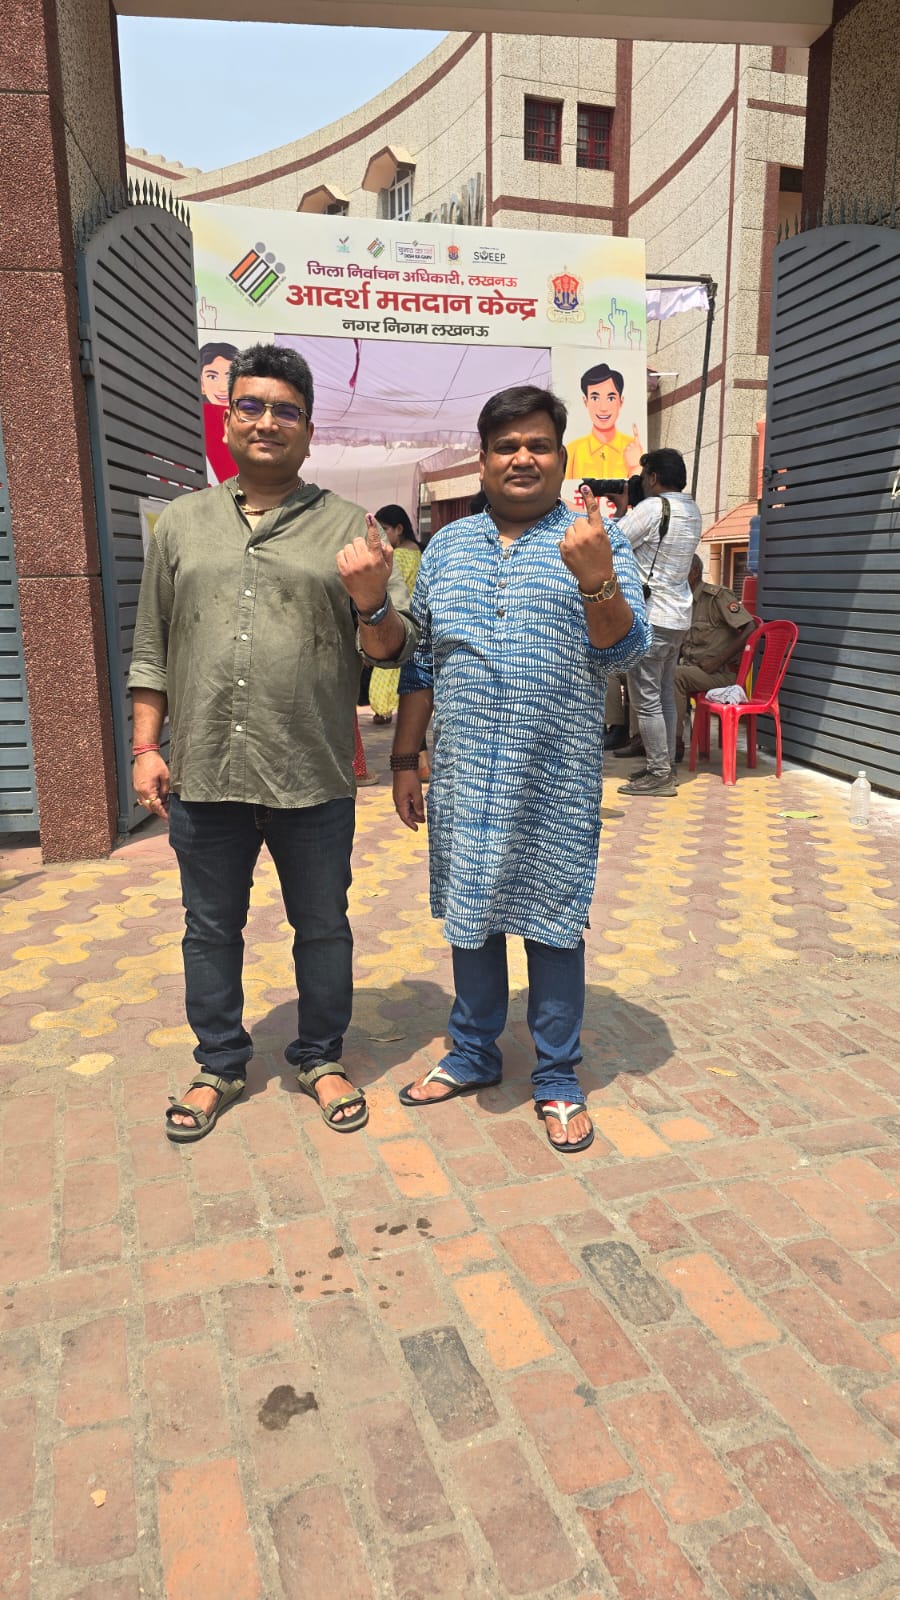 Business leader Rohit Agarwal cast his vote along with his brother Imagine Group Chairman Amit Agarwal.